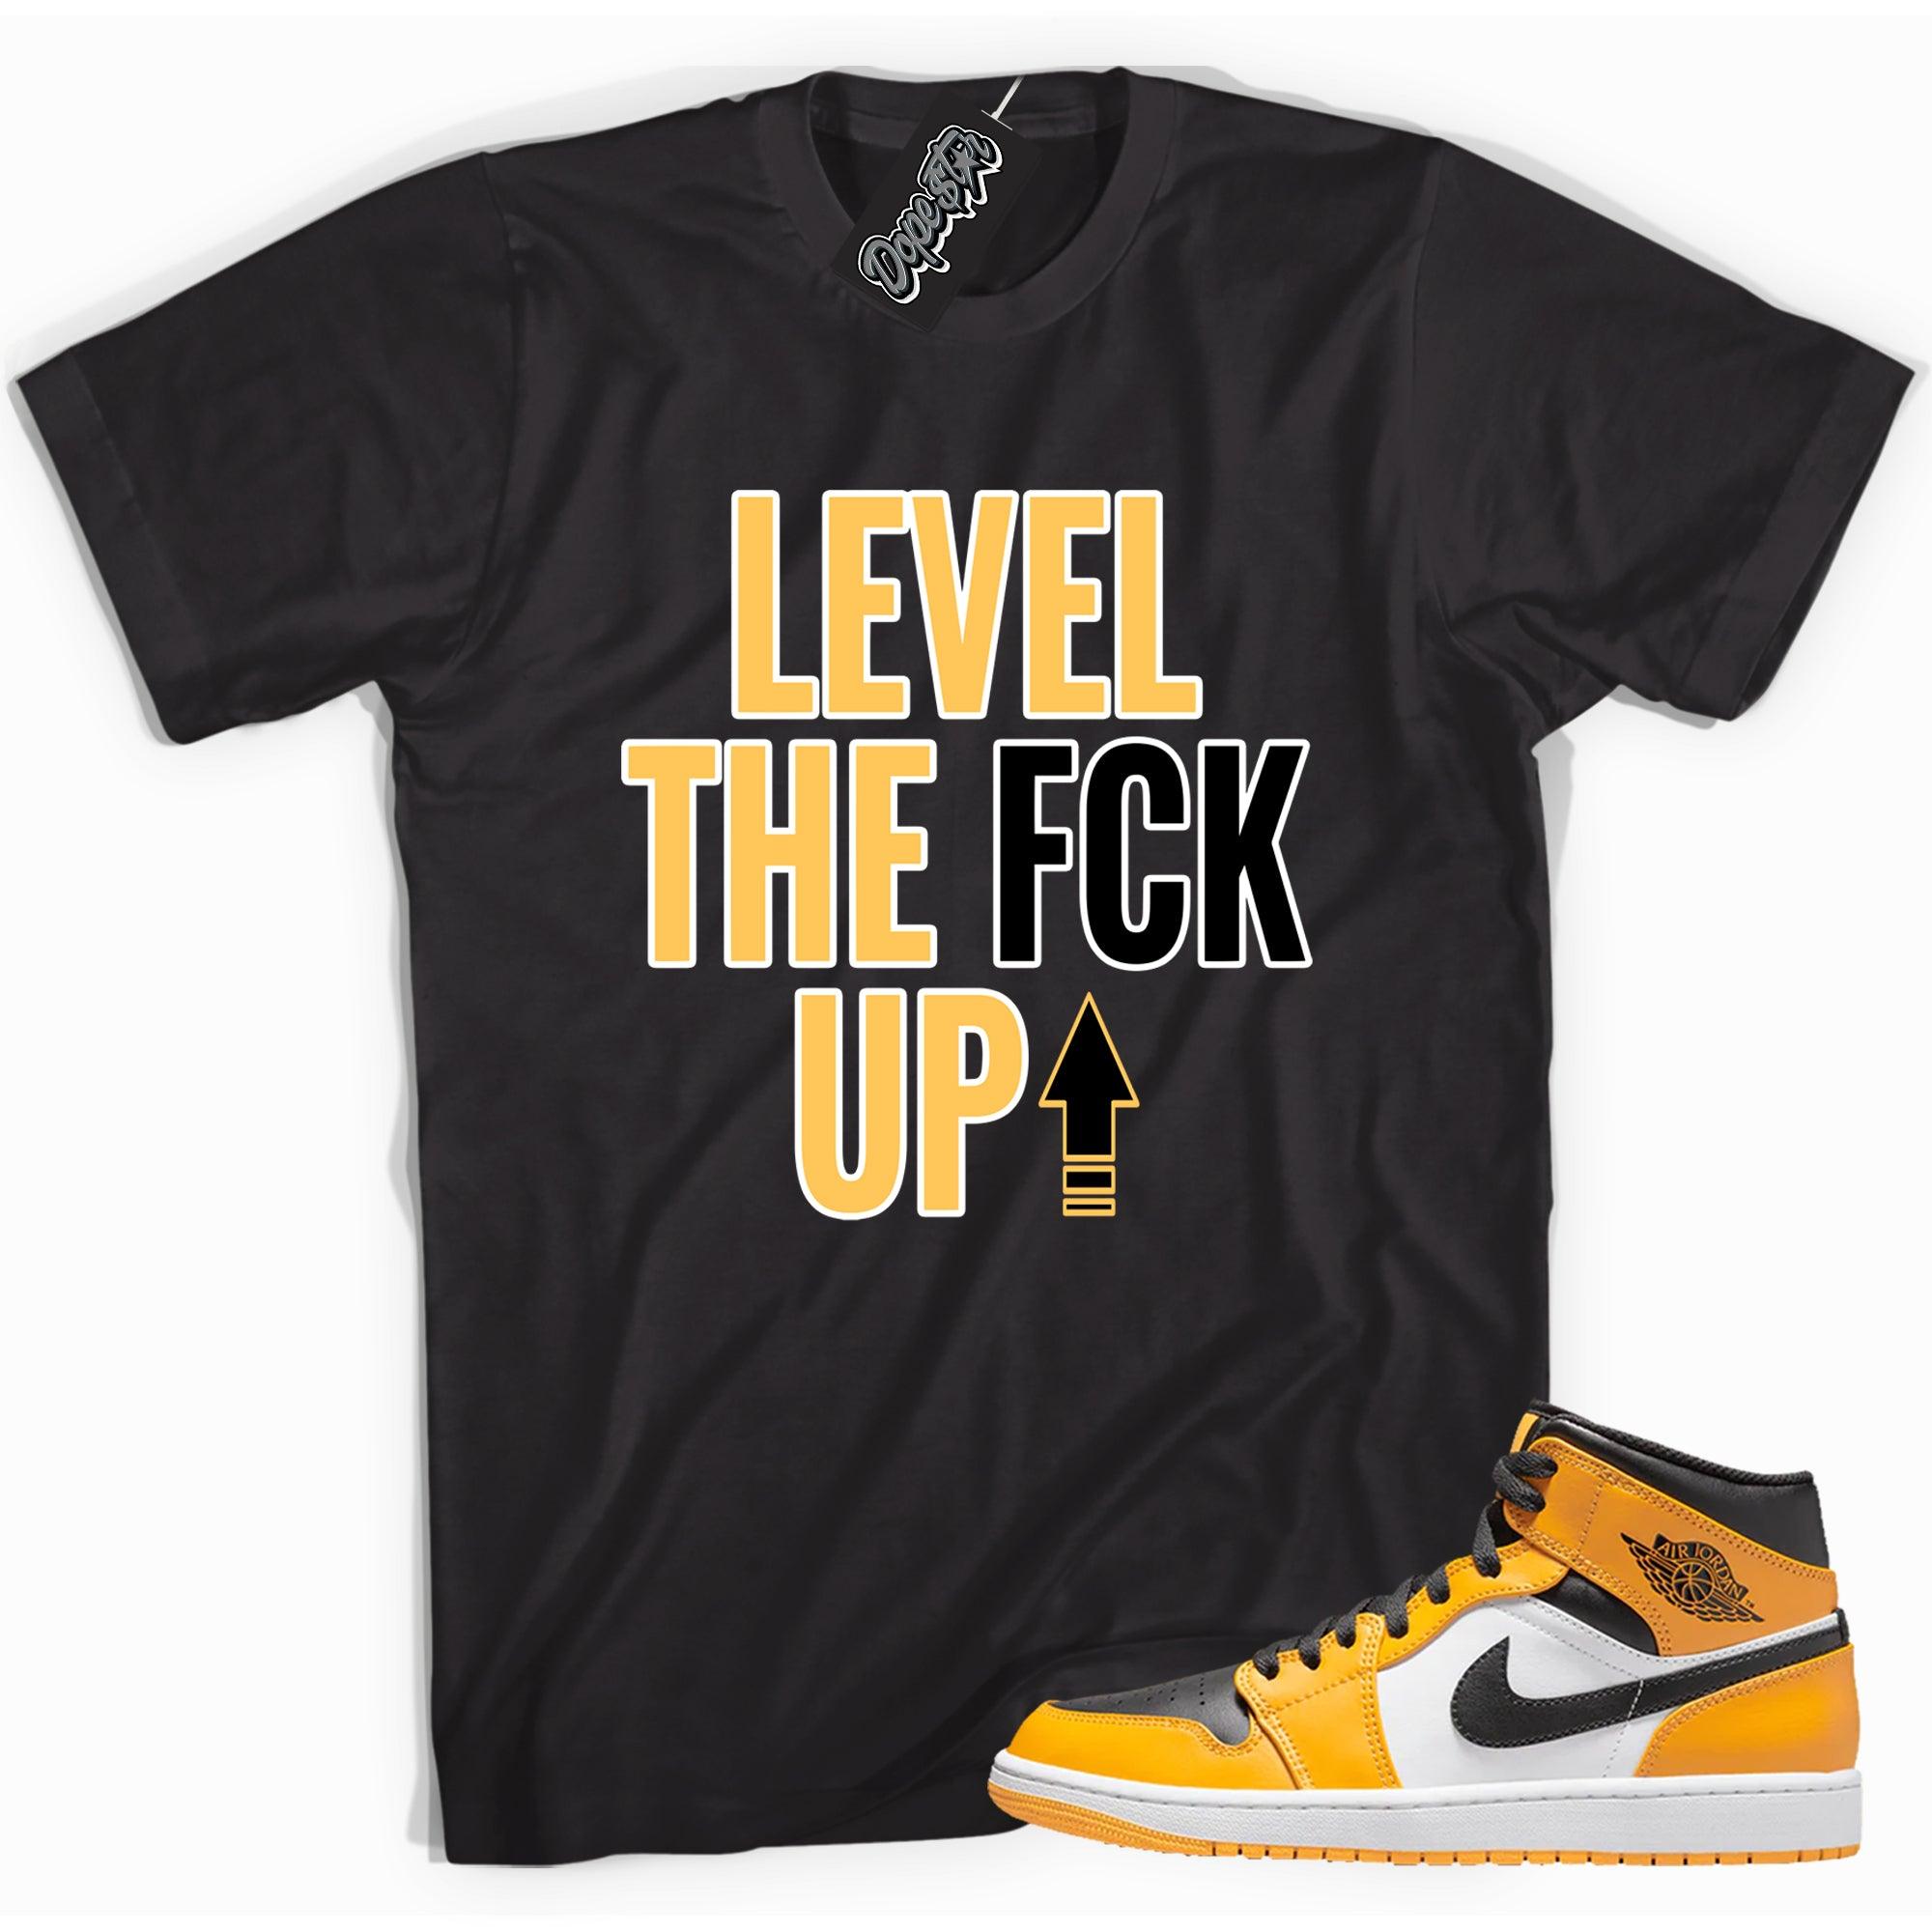 Cool black graphic tee with 'Level Up' print, that perfectly matches Air Jordan 1 MID TAXI sneakers.